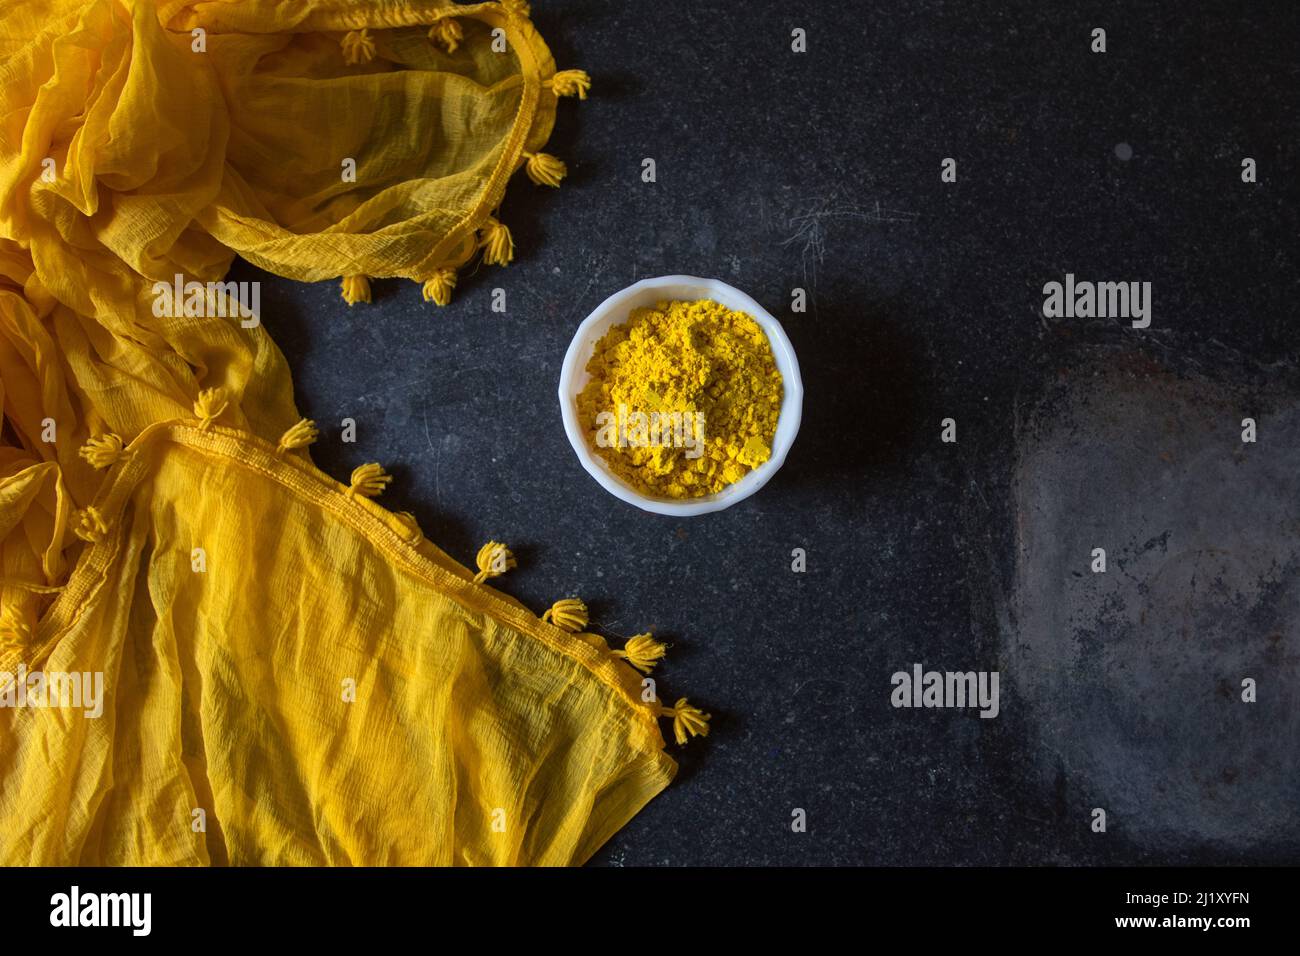 Gulal or holi festival yellow powder color in bowl on a dark background. Stock Photo